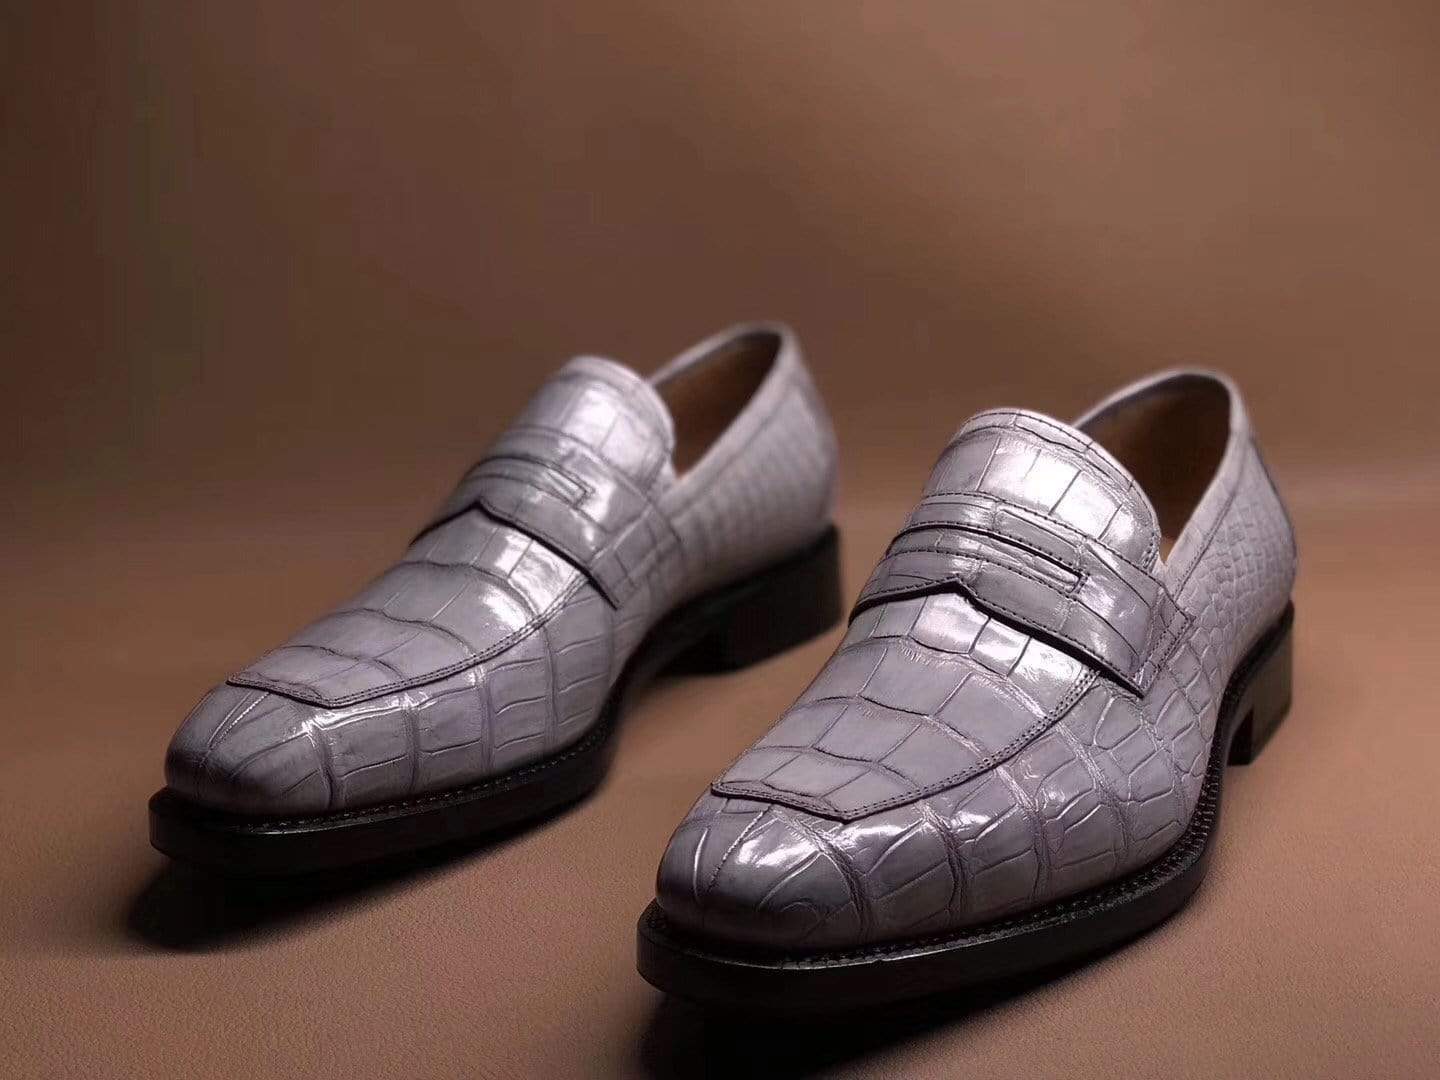 mens crocodile penny loafers